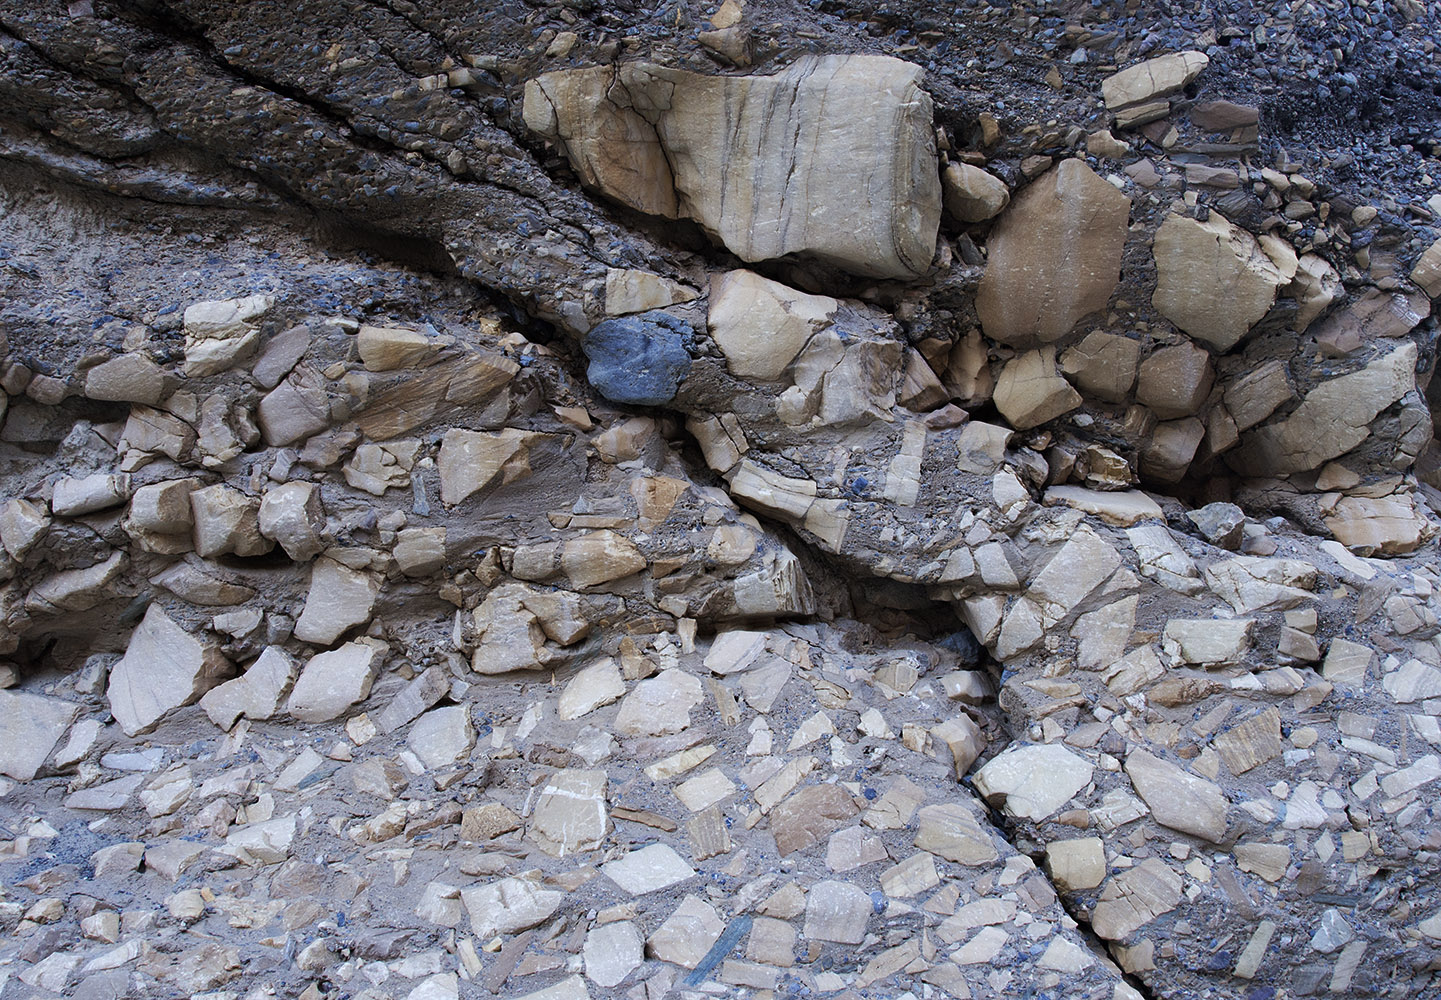 Mosaic Canyon – Cemented dolomite breccia from previous sediment- and rock-rich flooding.